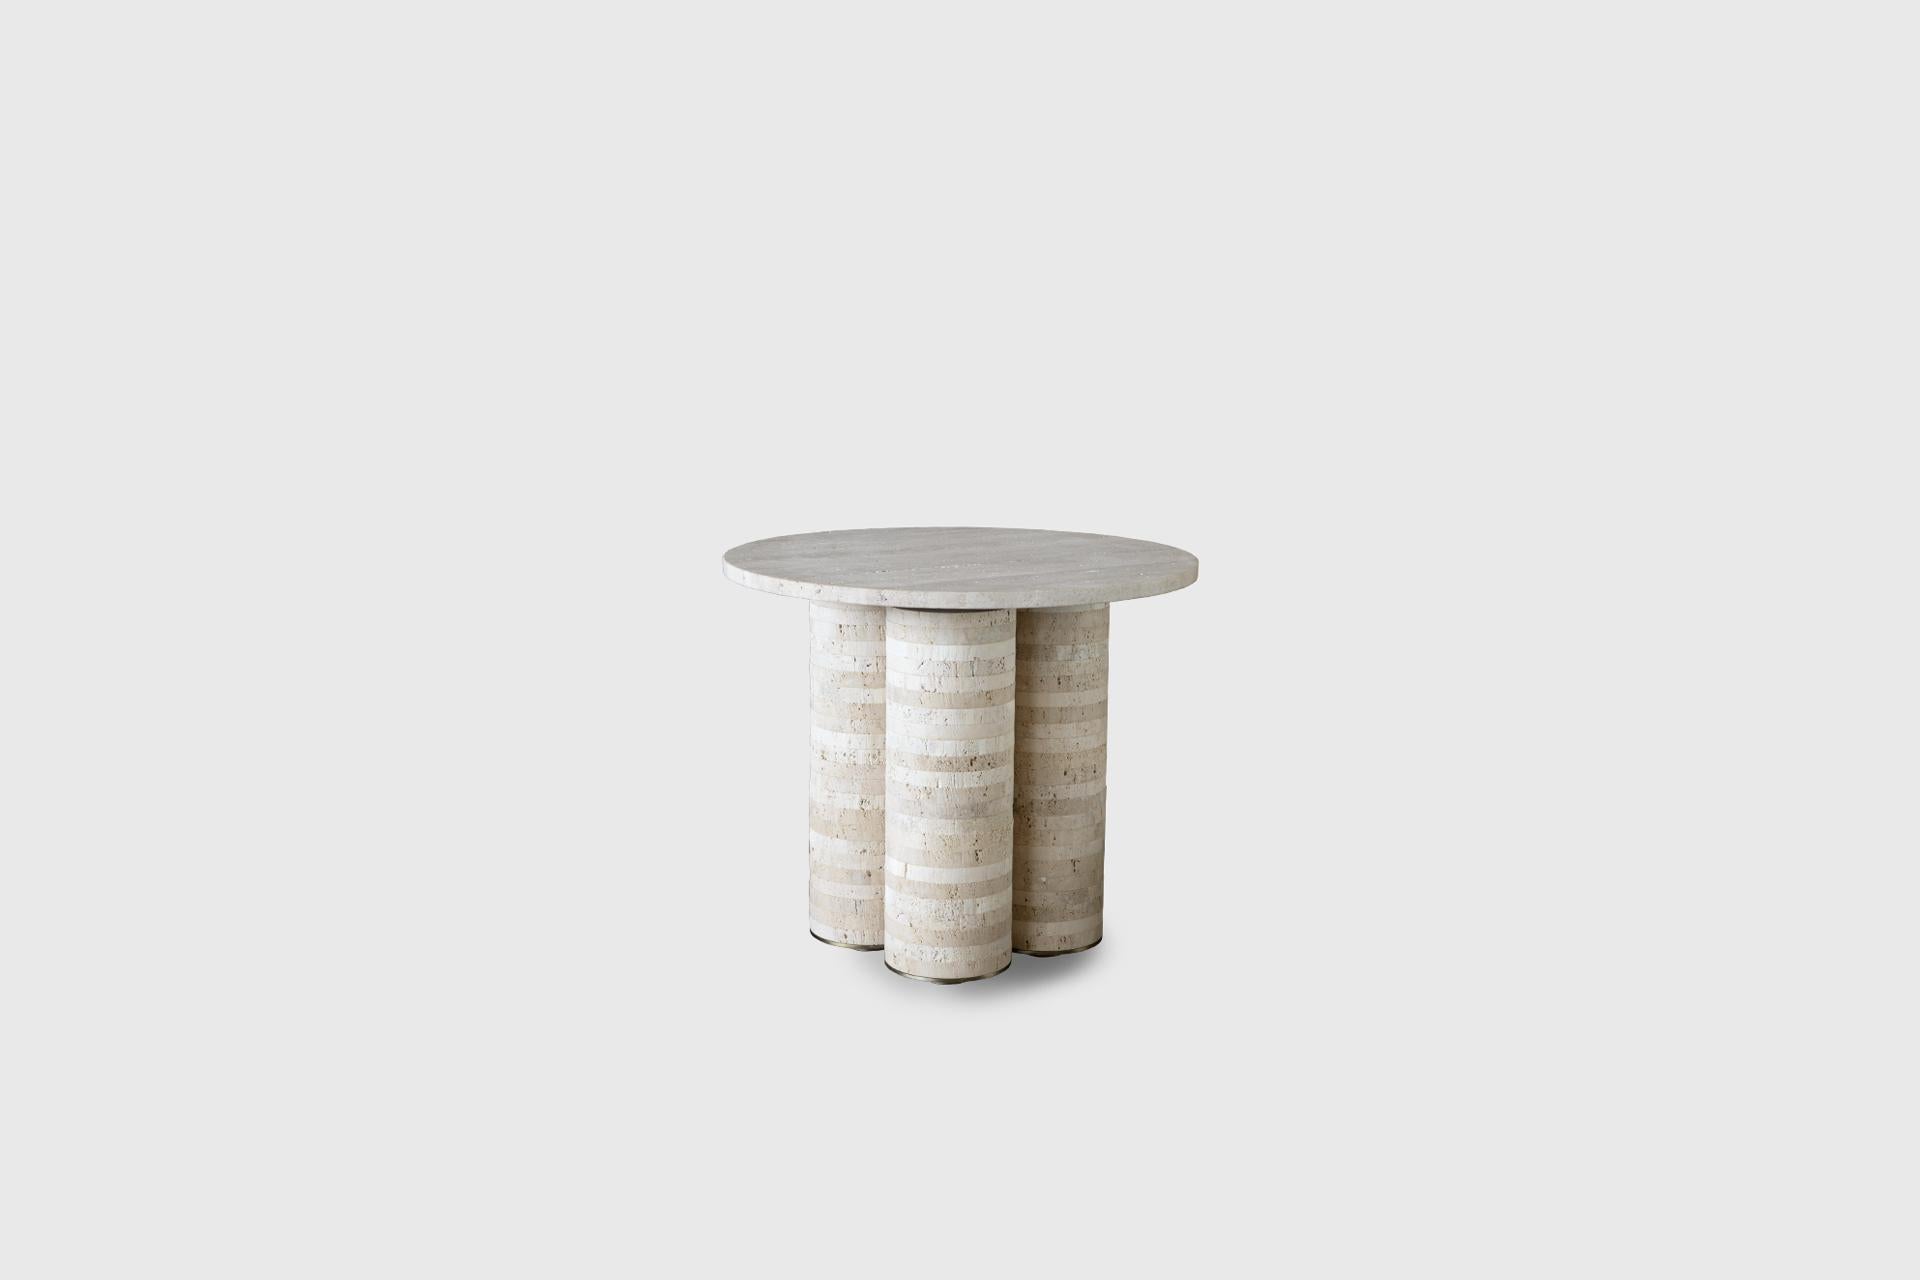 Tall Trilith Side Table by Atra Design
Dimensions: D 50 x H 42 cm.
Materials: Travertine, brass.
Other stones available. Please contact us. 

Trilith side table Tall in Travertine Navona white, with streaked blackened brass.  

We are Atra, a